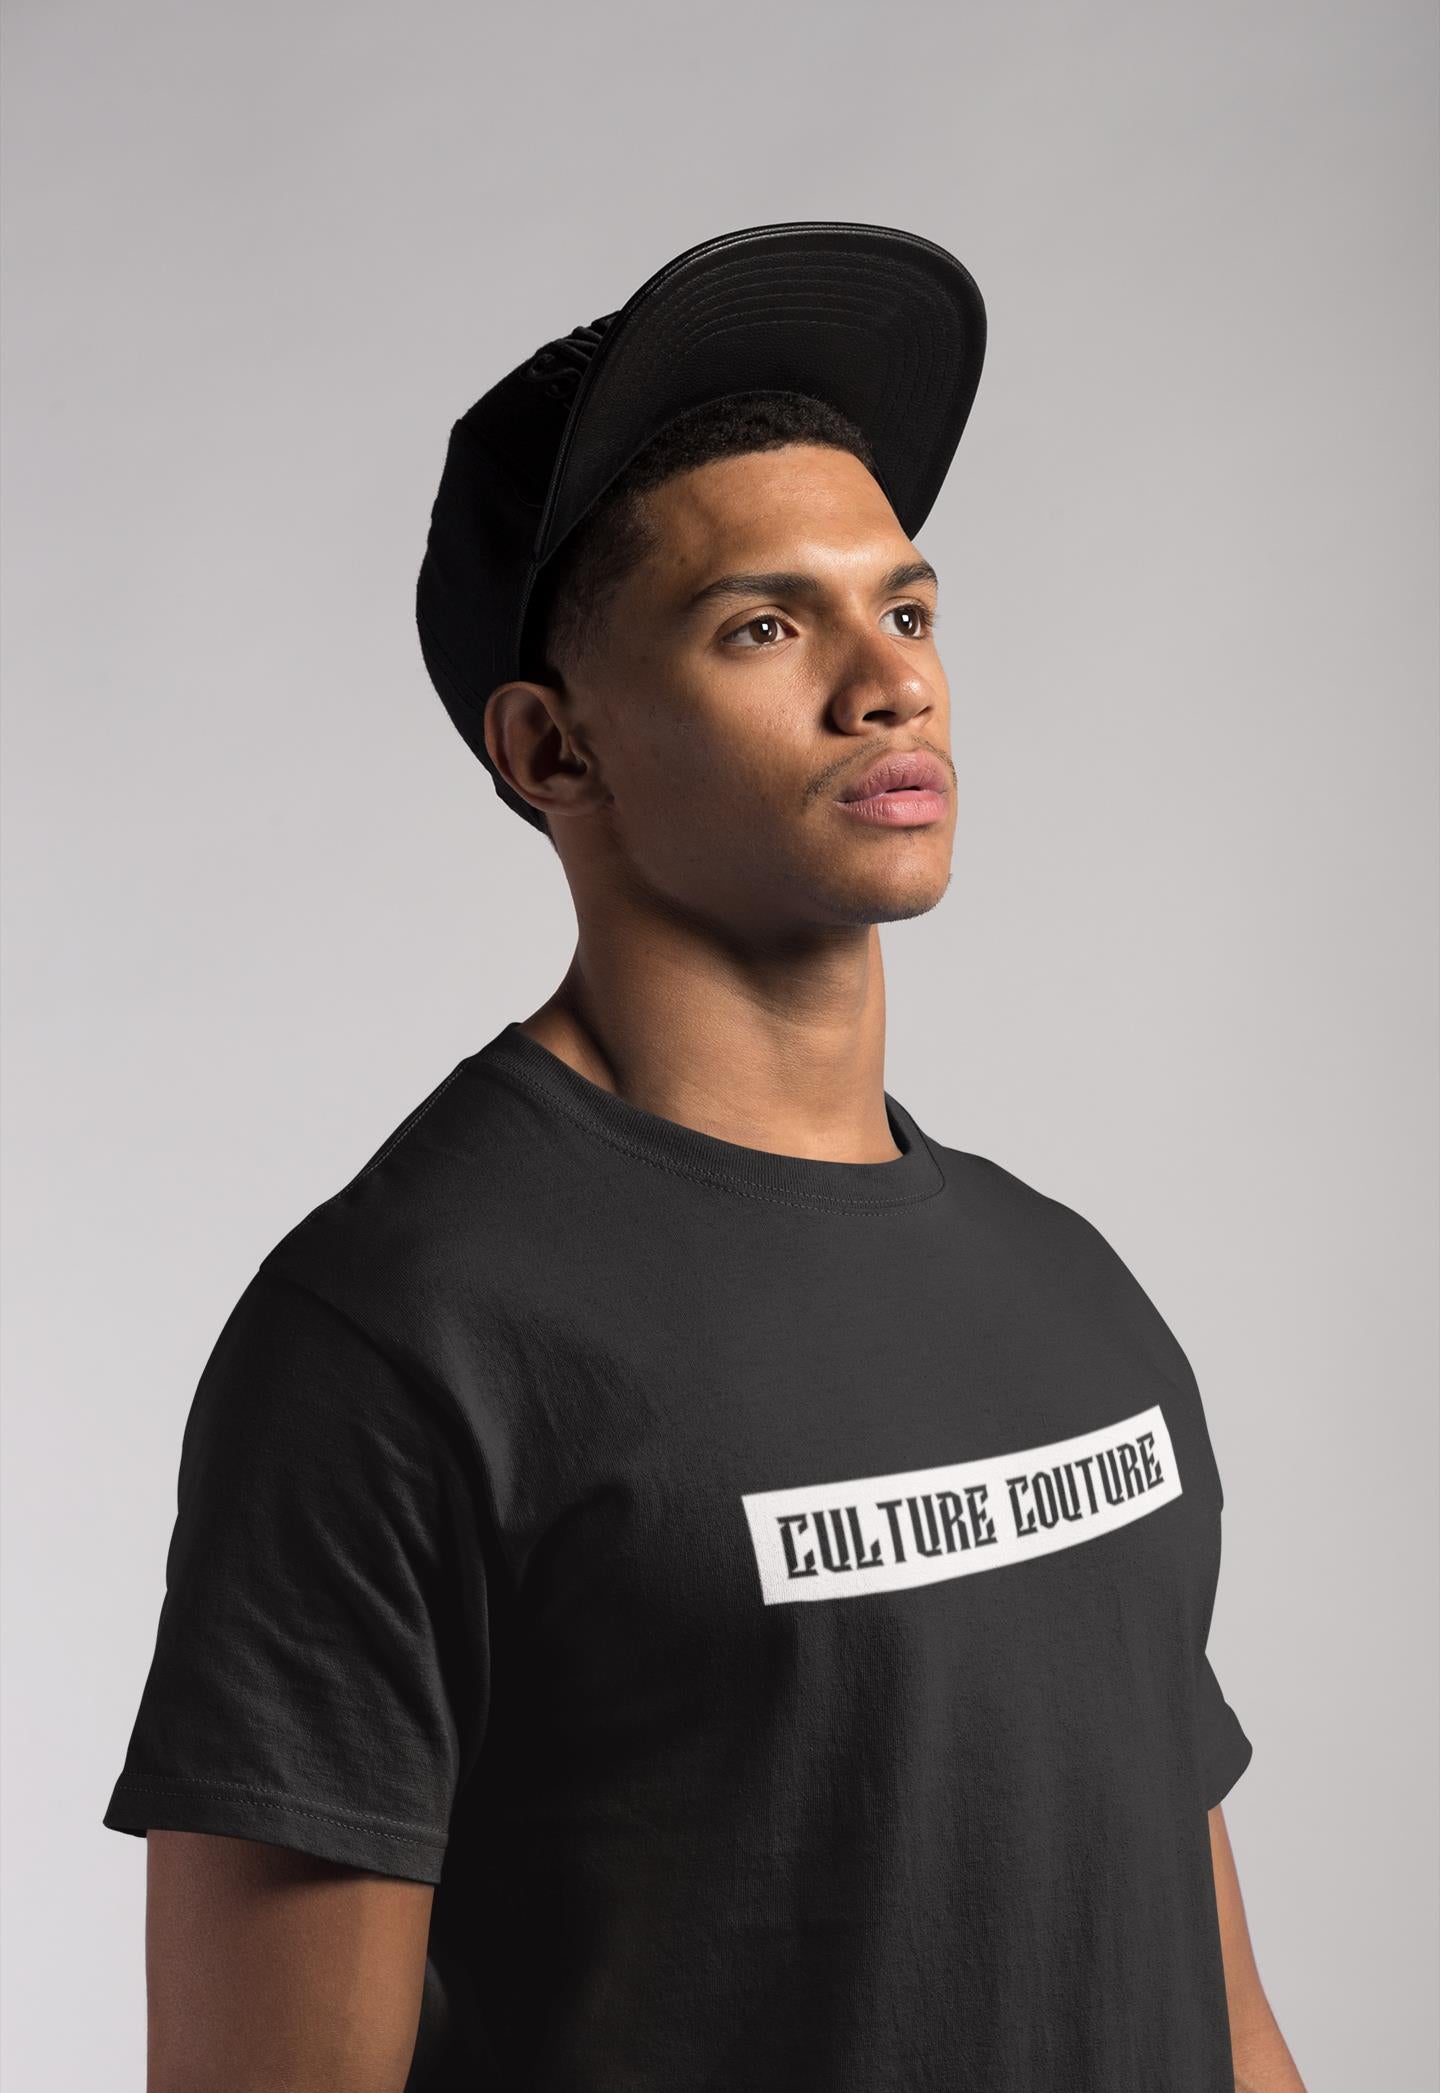 Culture Couture Stamp T-Shirt/Black/White